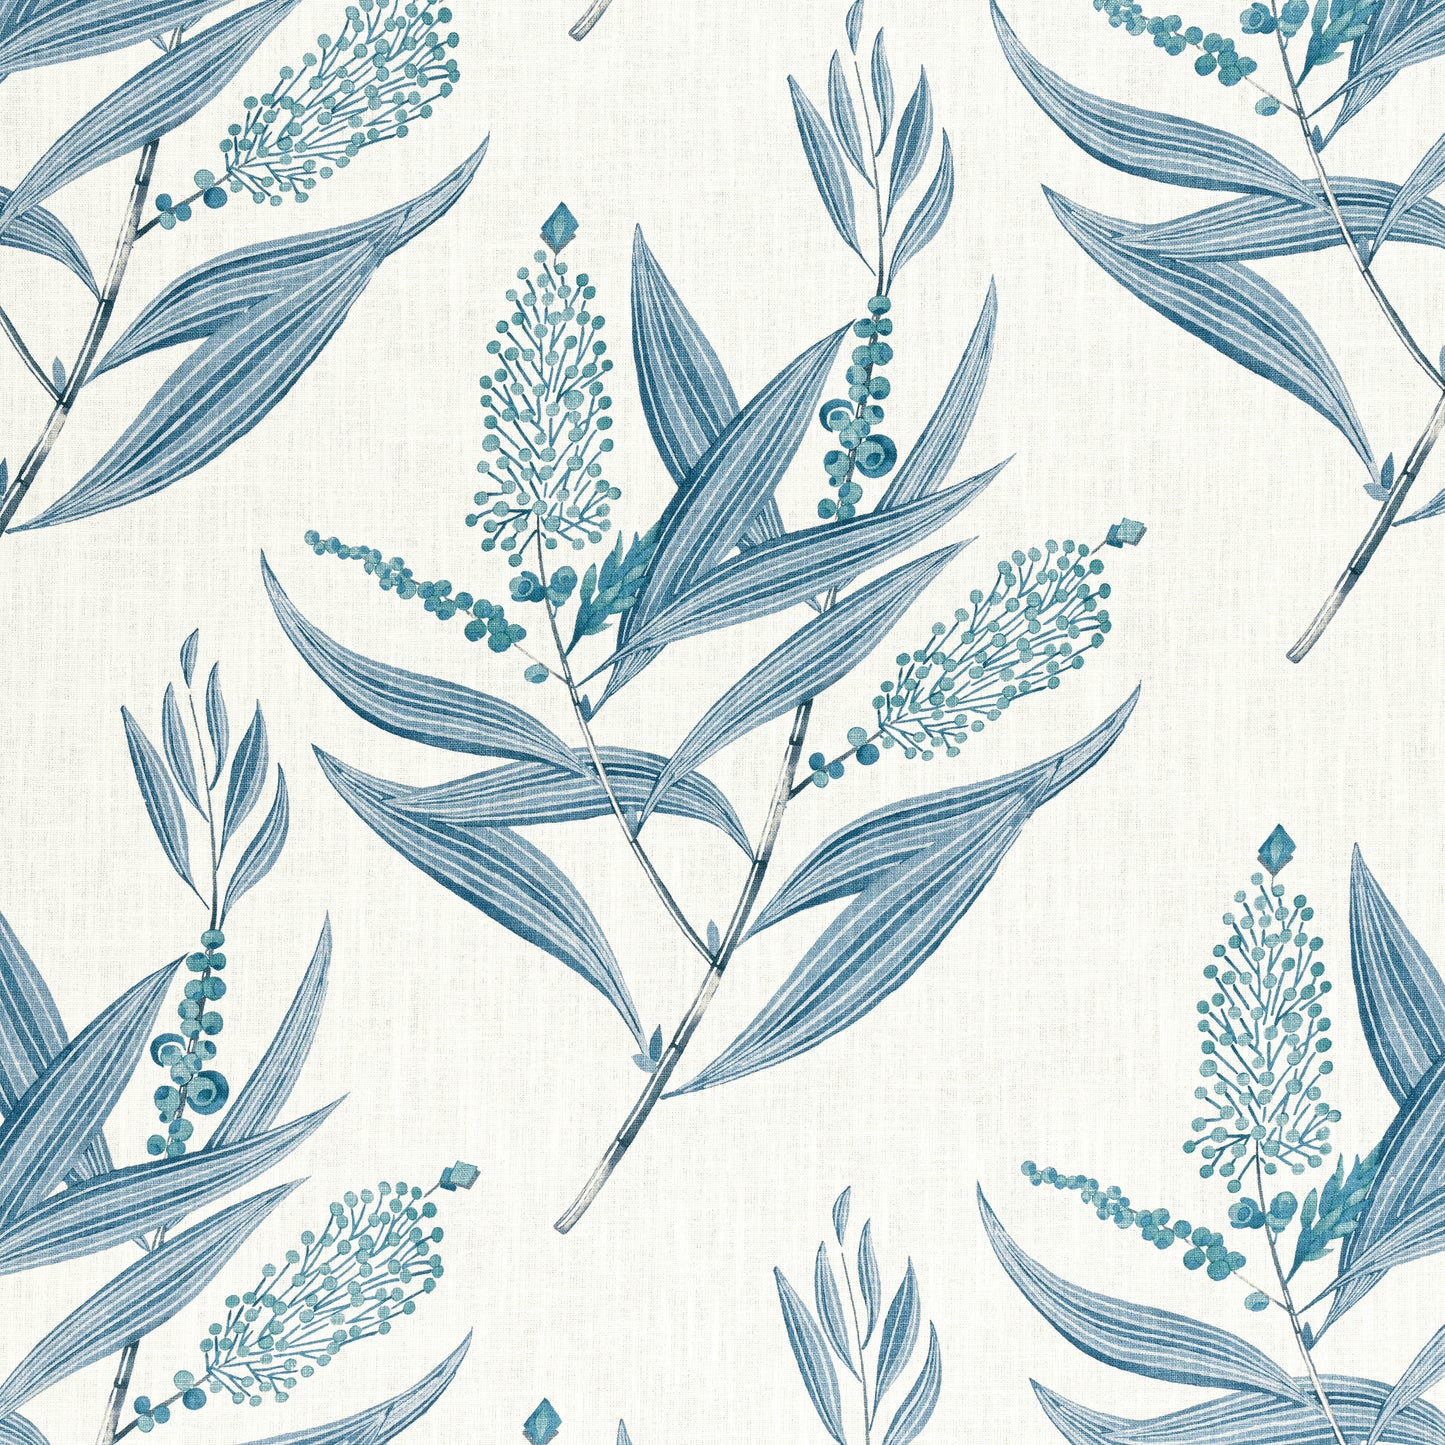 Purchase  Ann French Fabric Product# AF23135  pattern name  Winter Bud